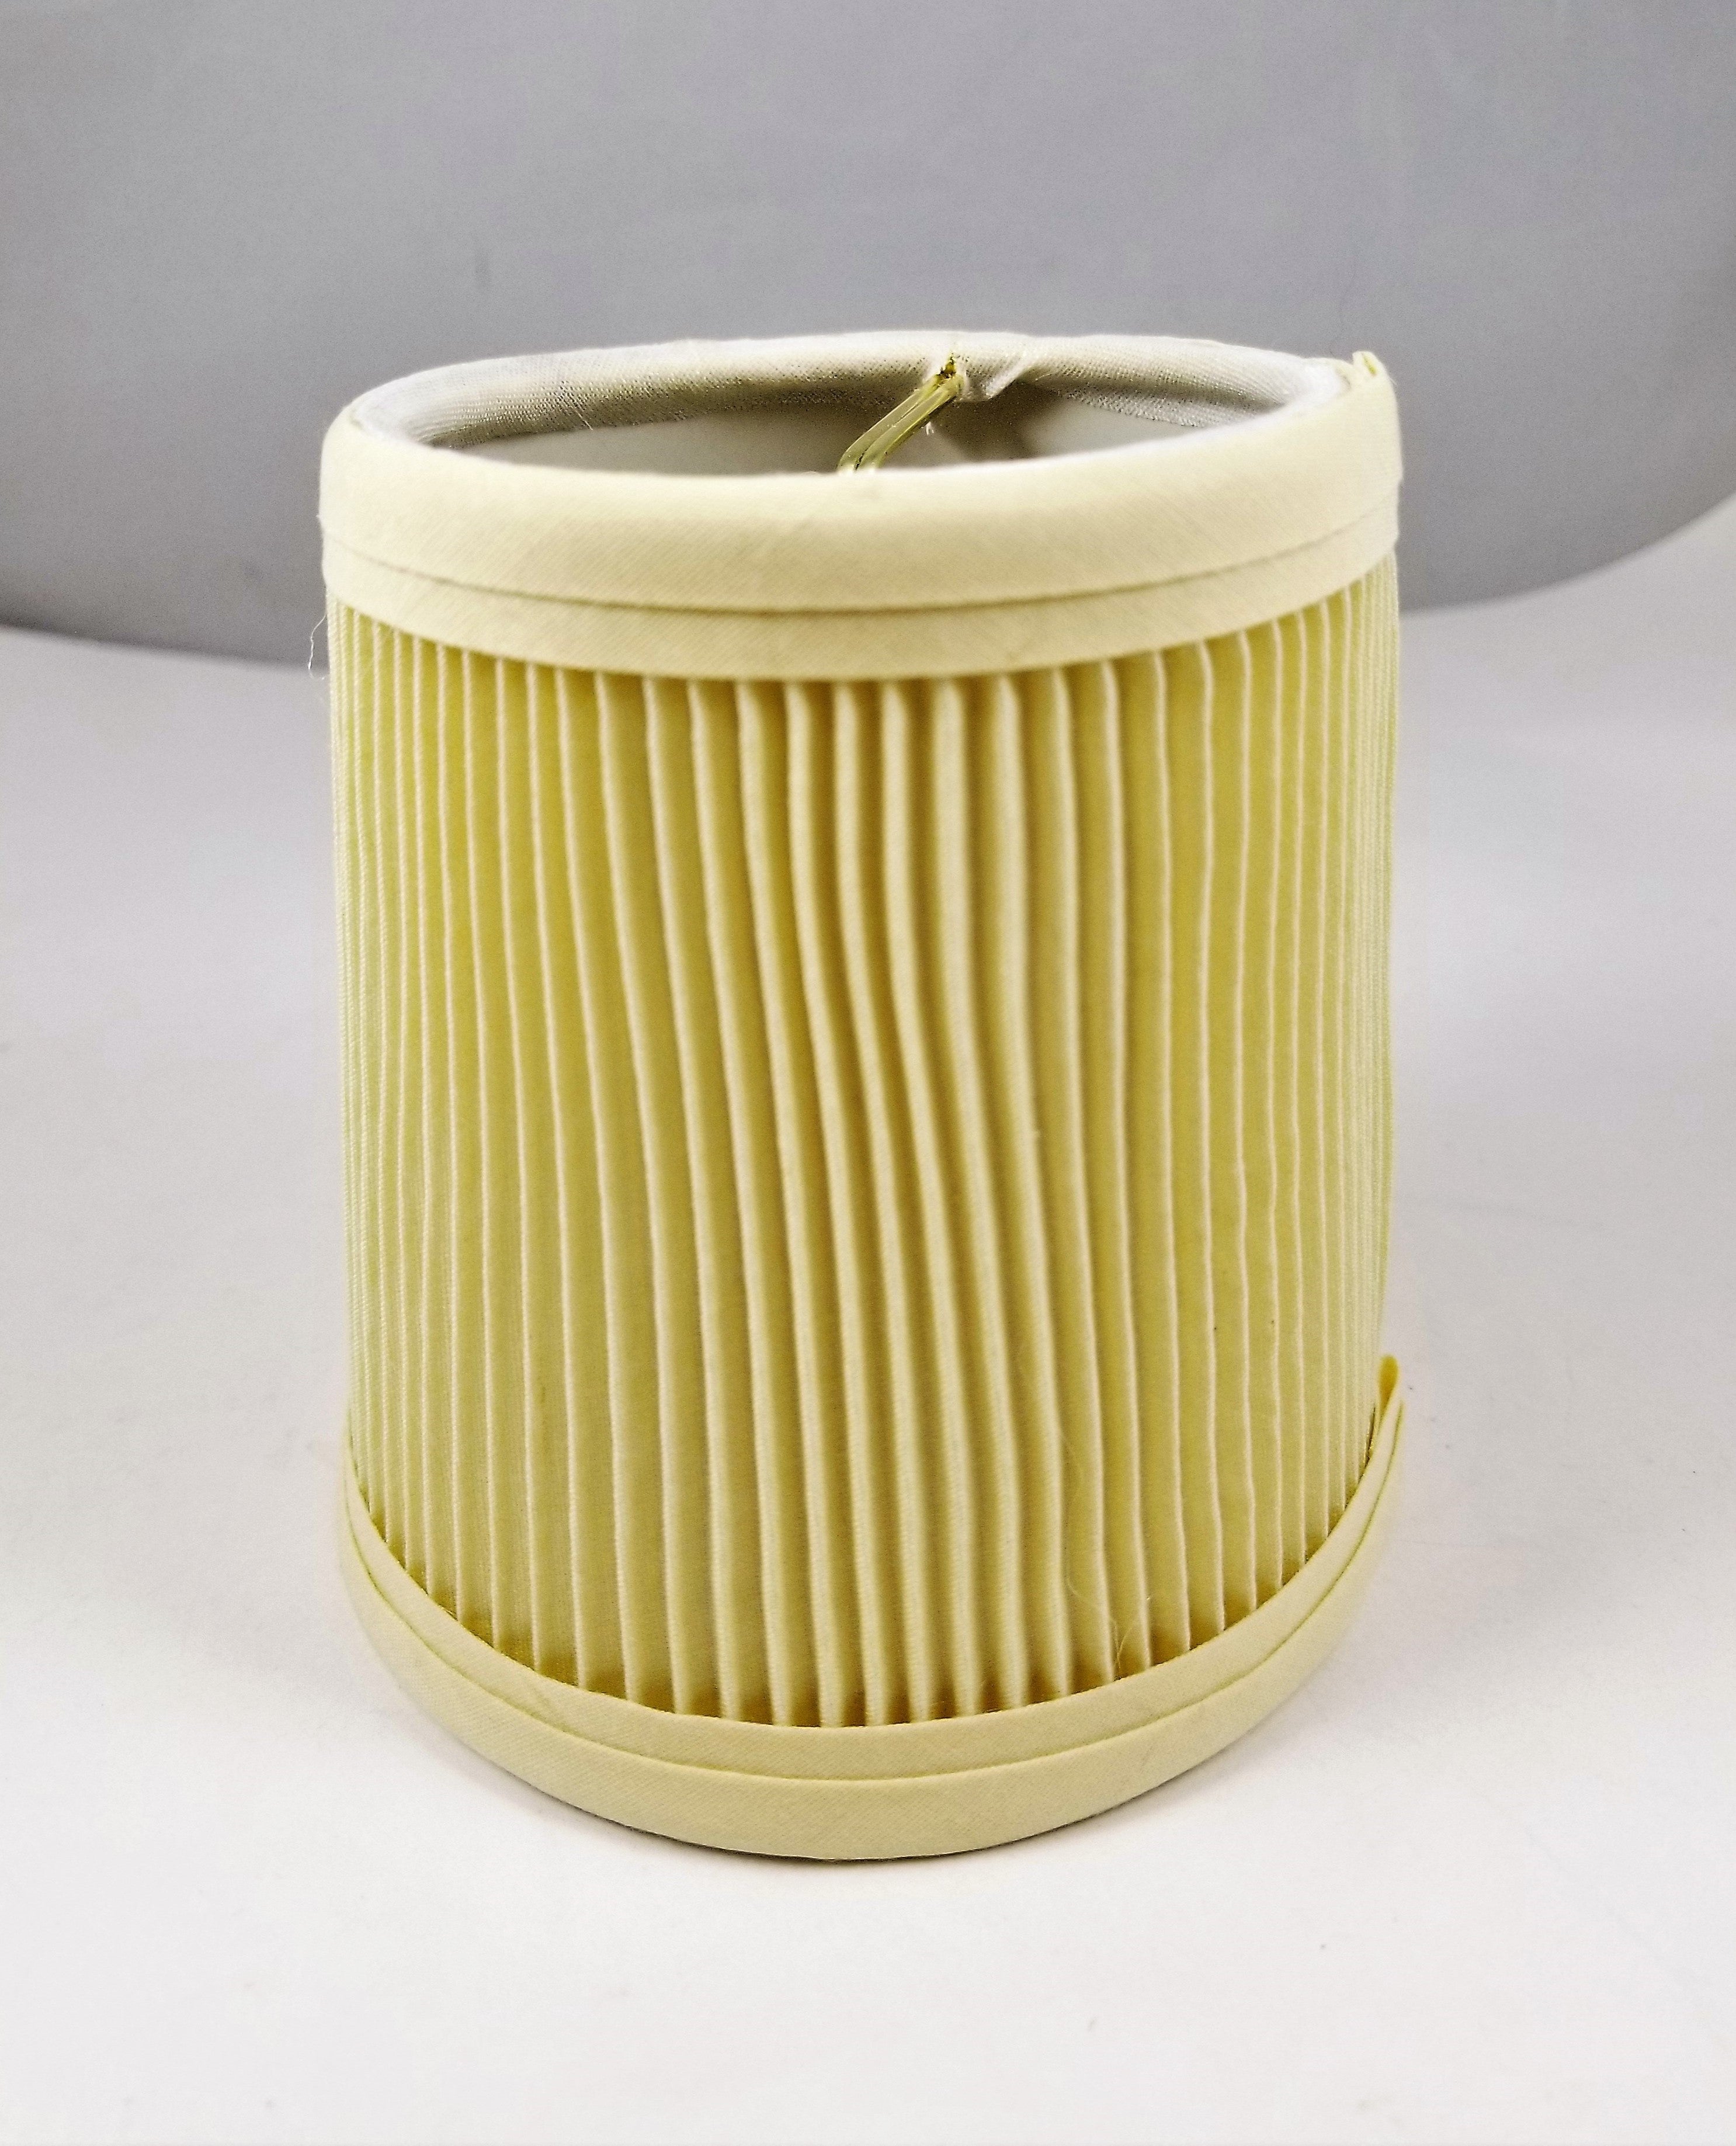 Pleated Clip-On Cloth Lamp Shade in Beige - 3"x 4"